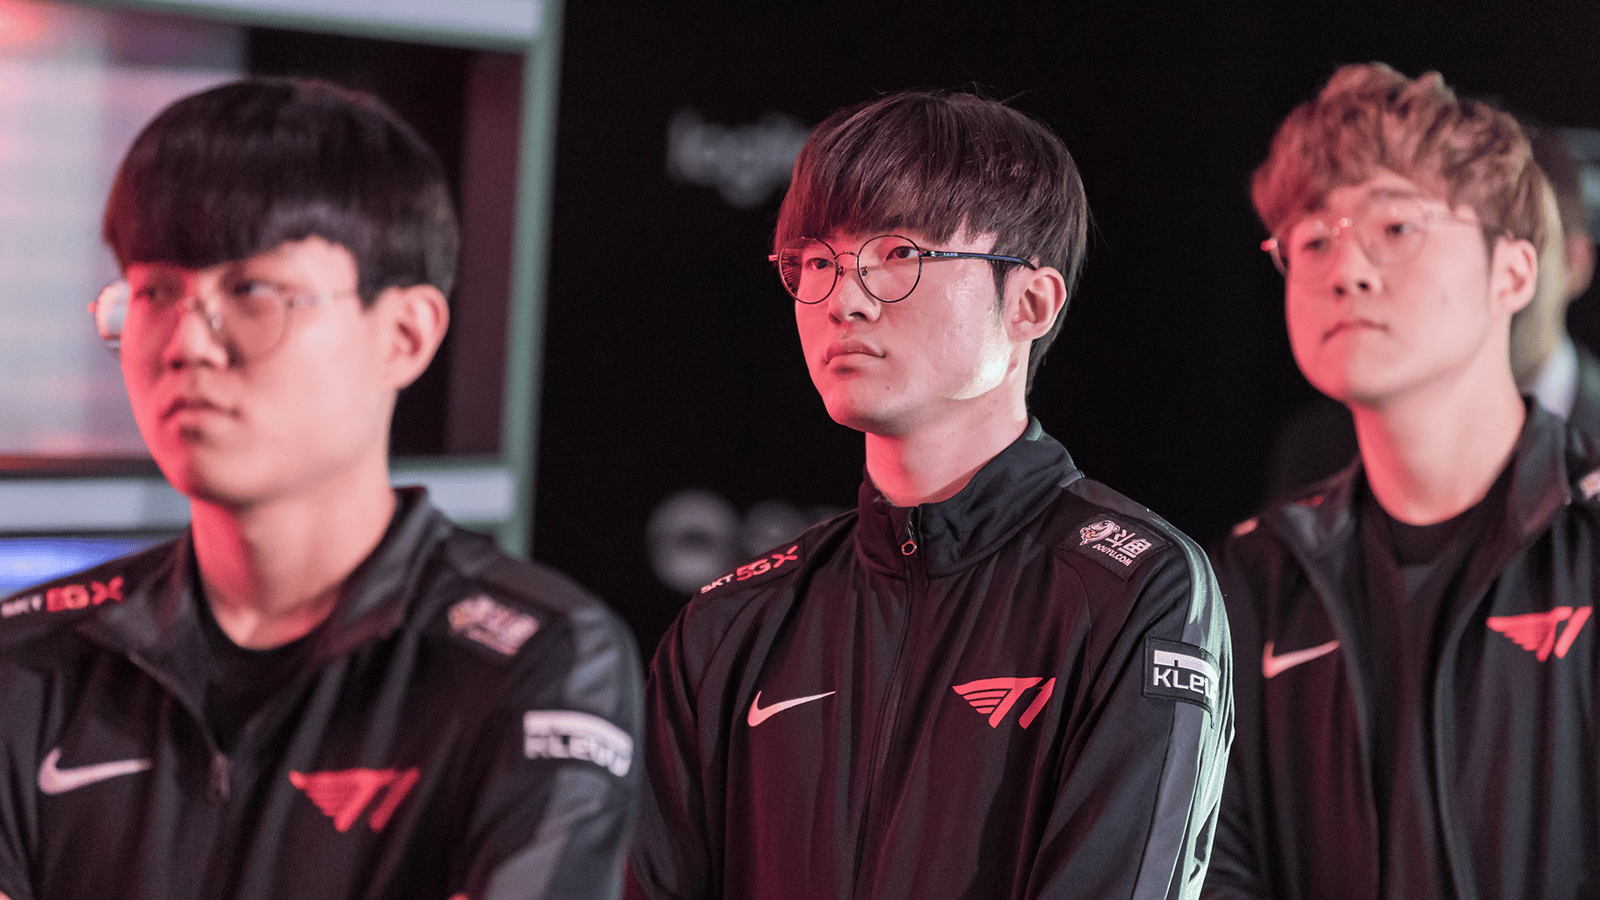 Faker slammed dense schedule live on stream, fans criticized T1 for the  behavior towards their players - Not A Gamer